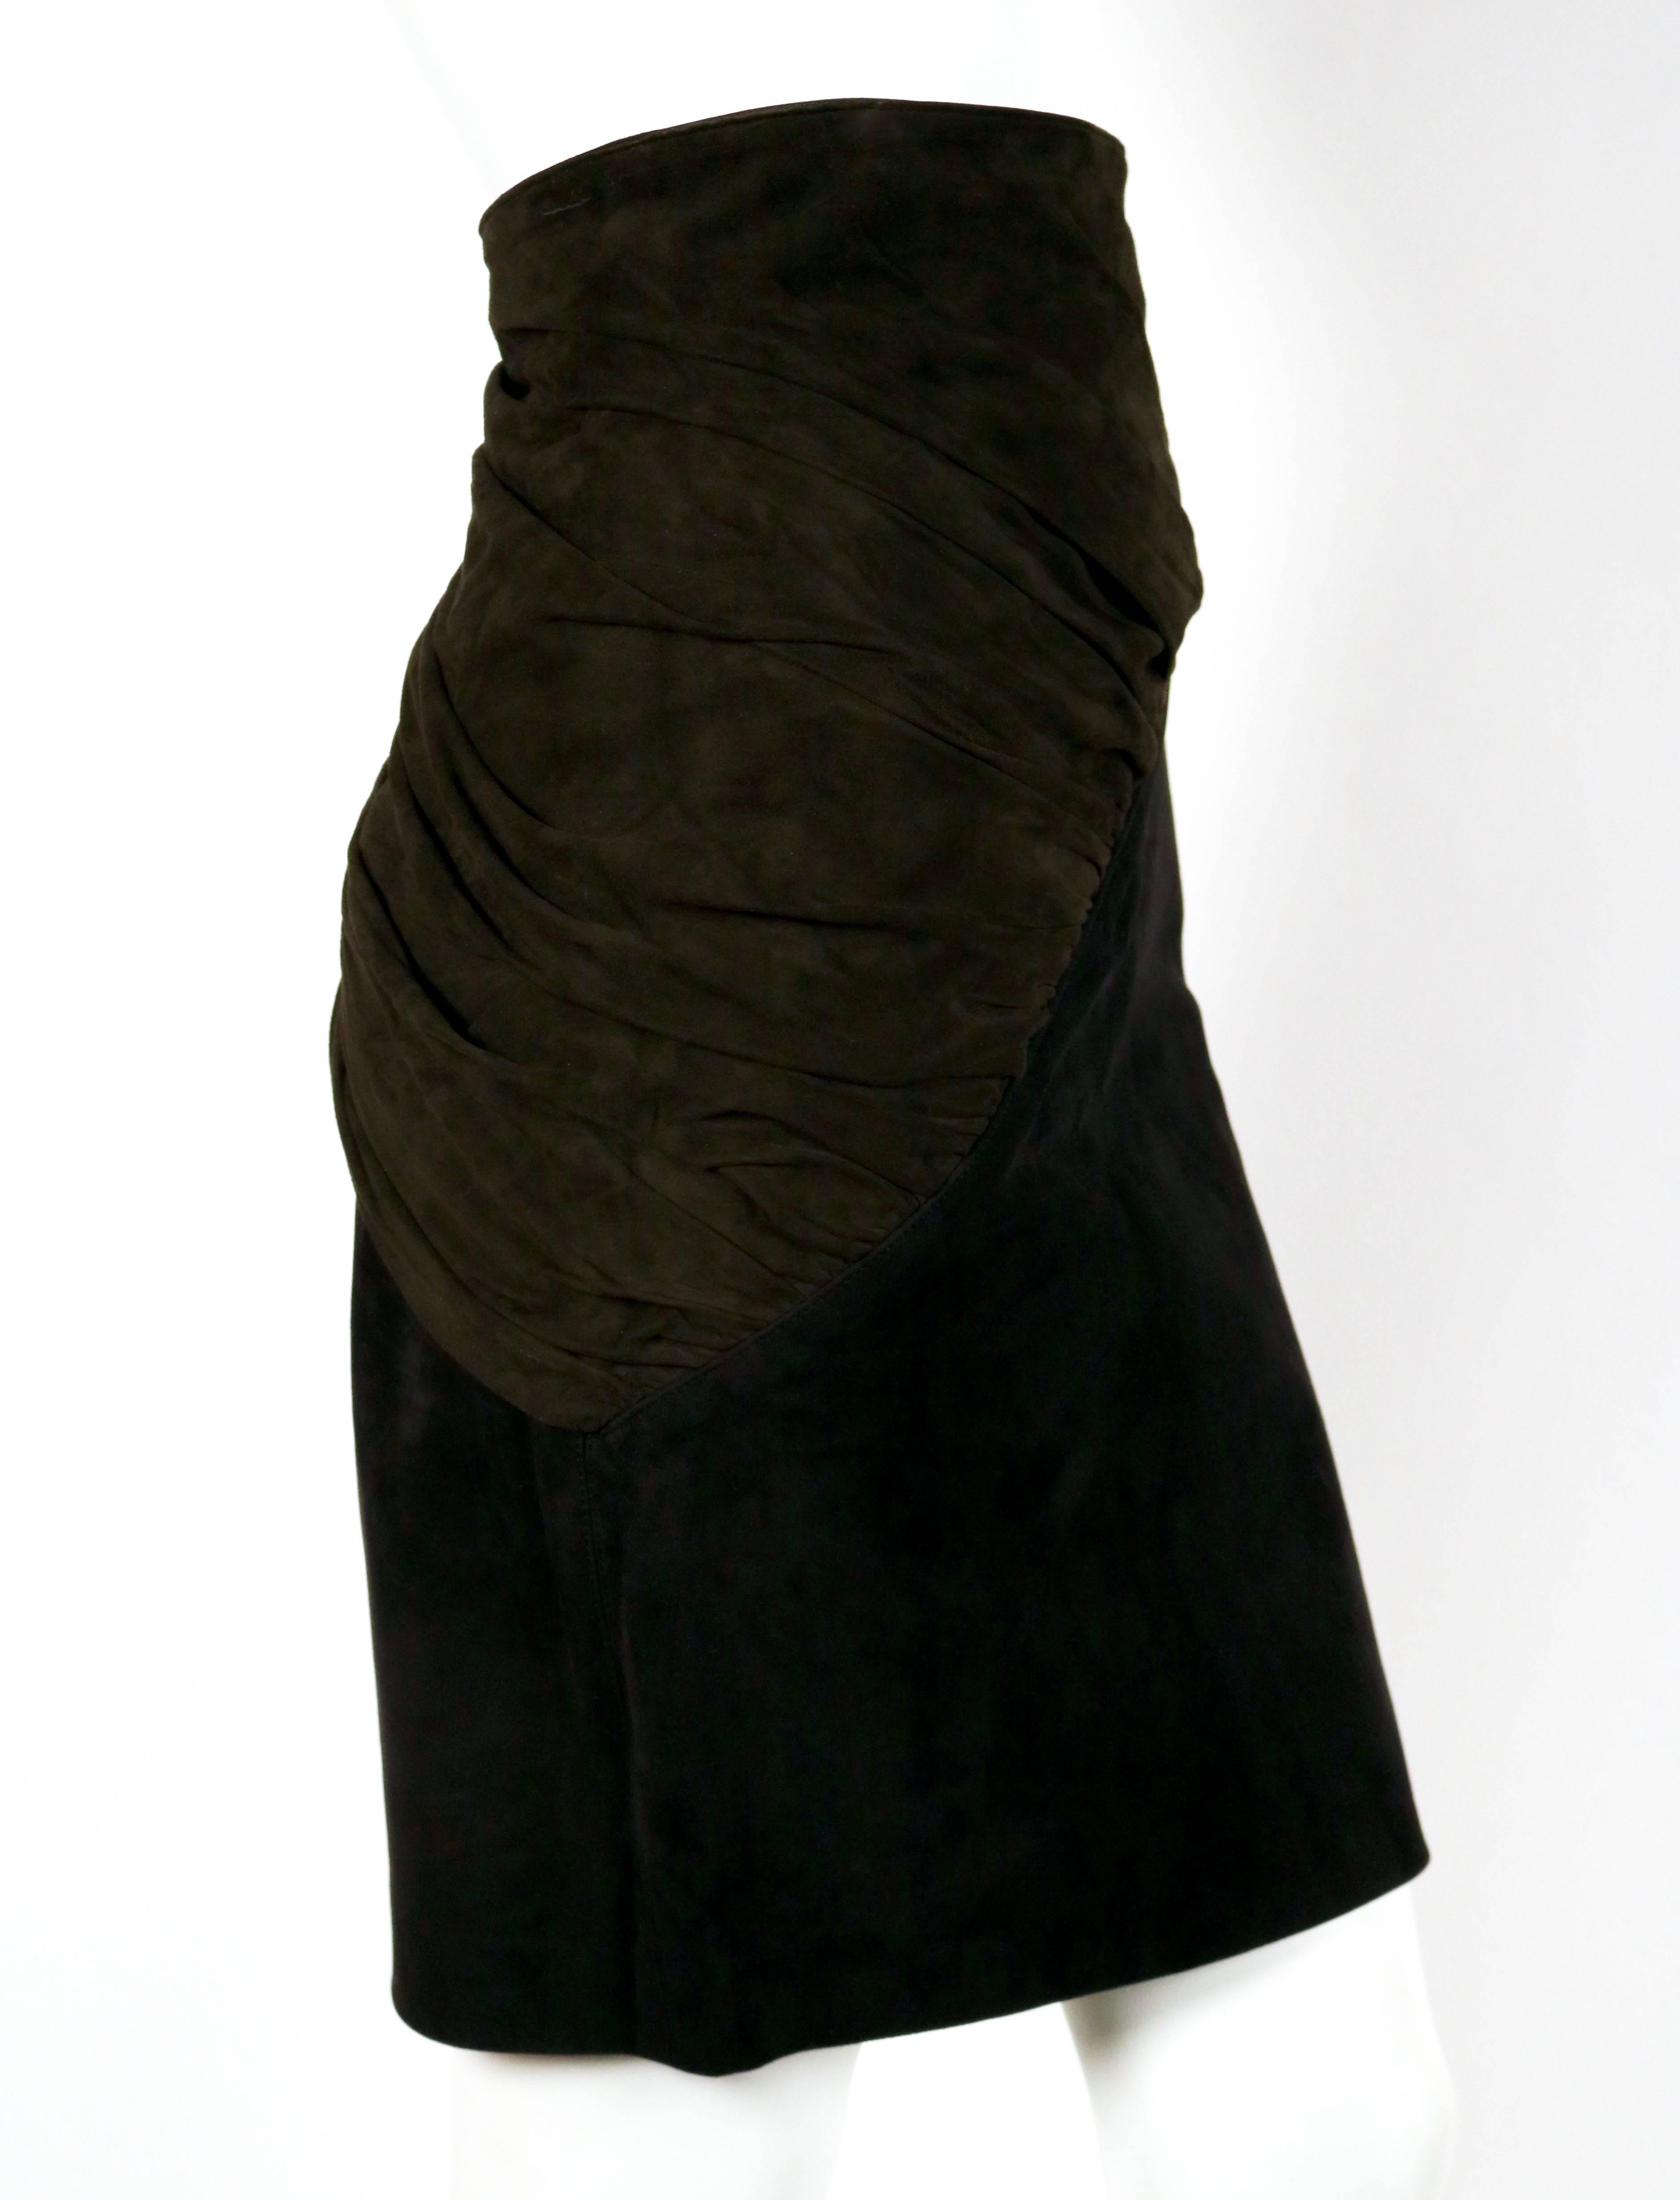 Jjet black suede skirt with olive suede ruched panel and side buckle from Azzedine Alaia dating to the early 1990's. Skirt best fits a size 2 or 4. Approximate measurements: waist 24-25